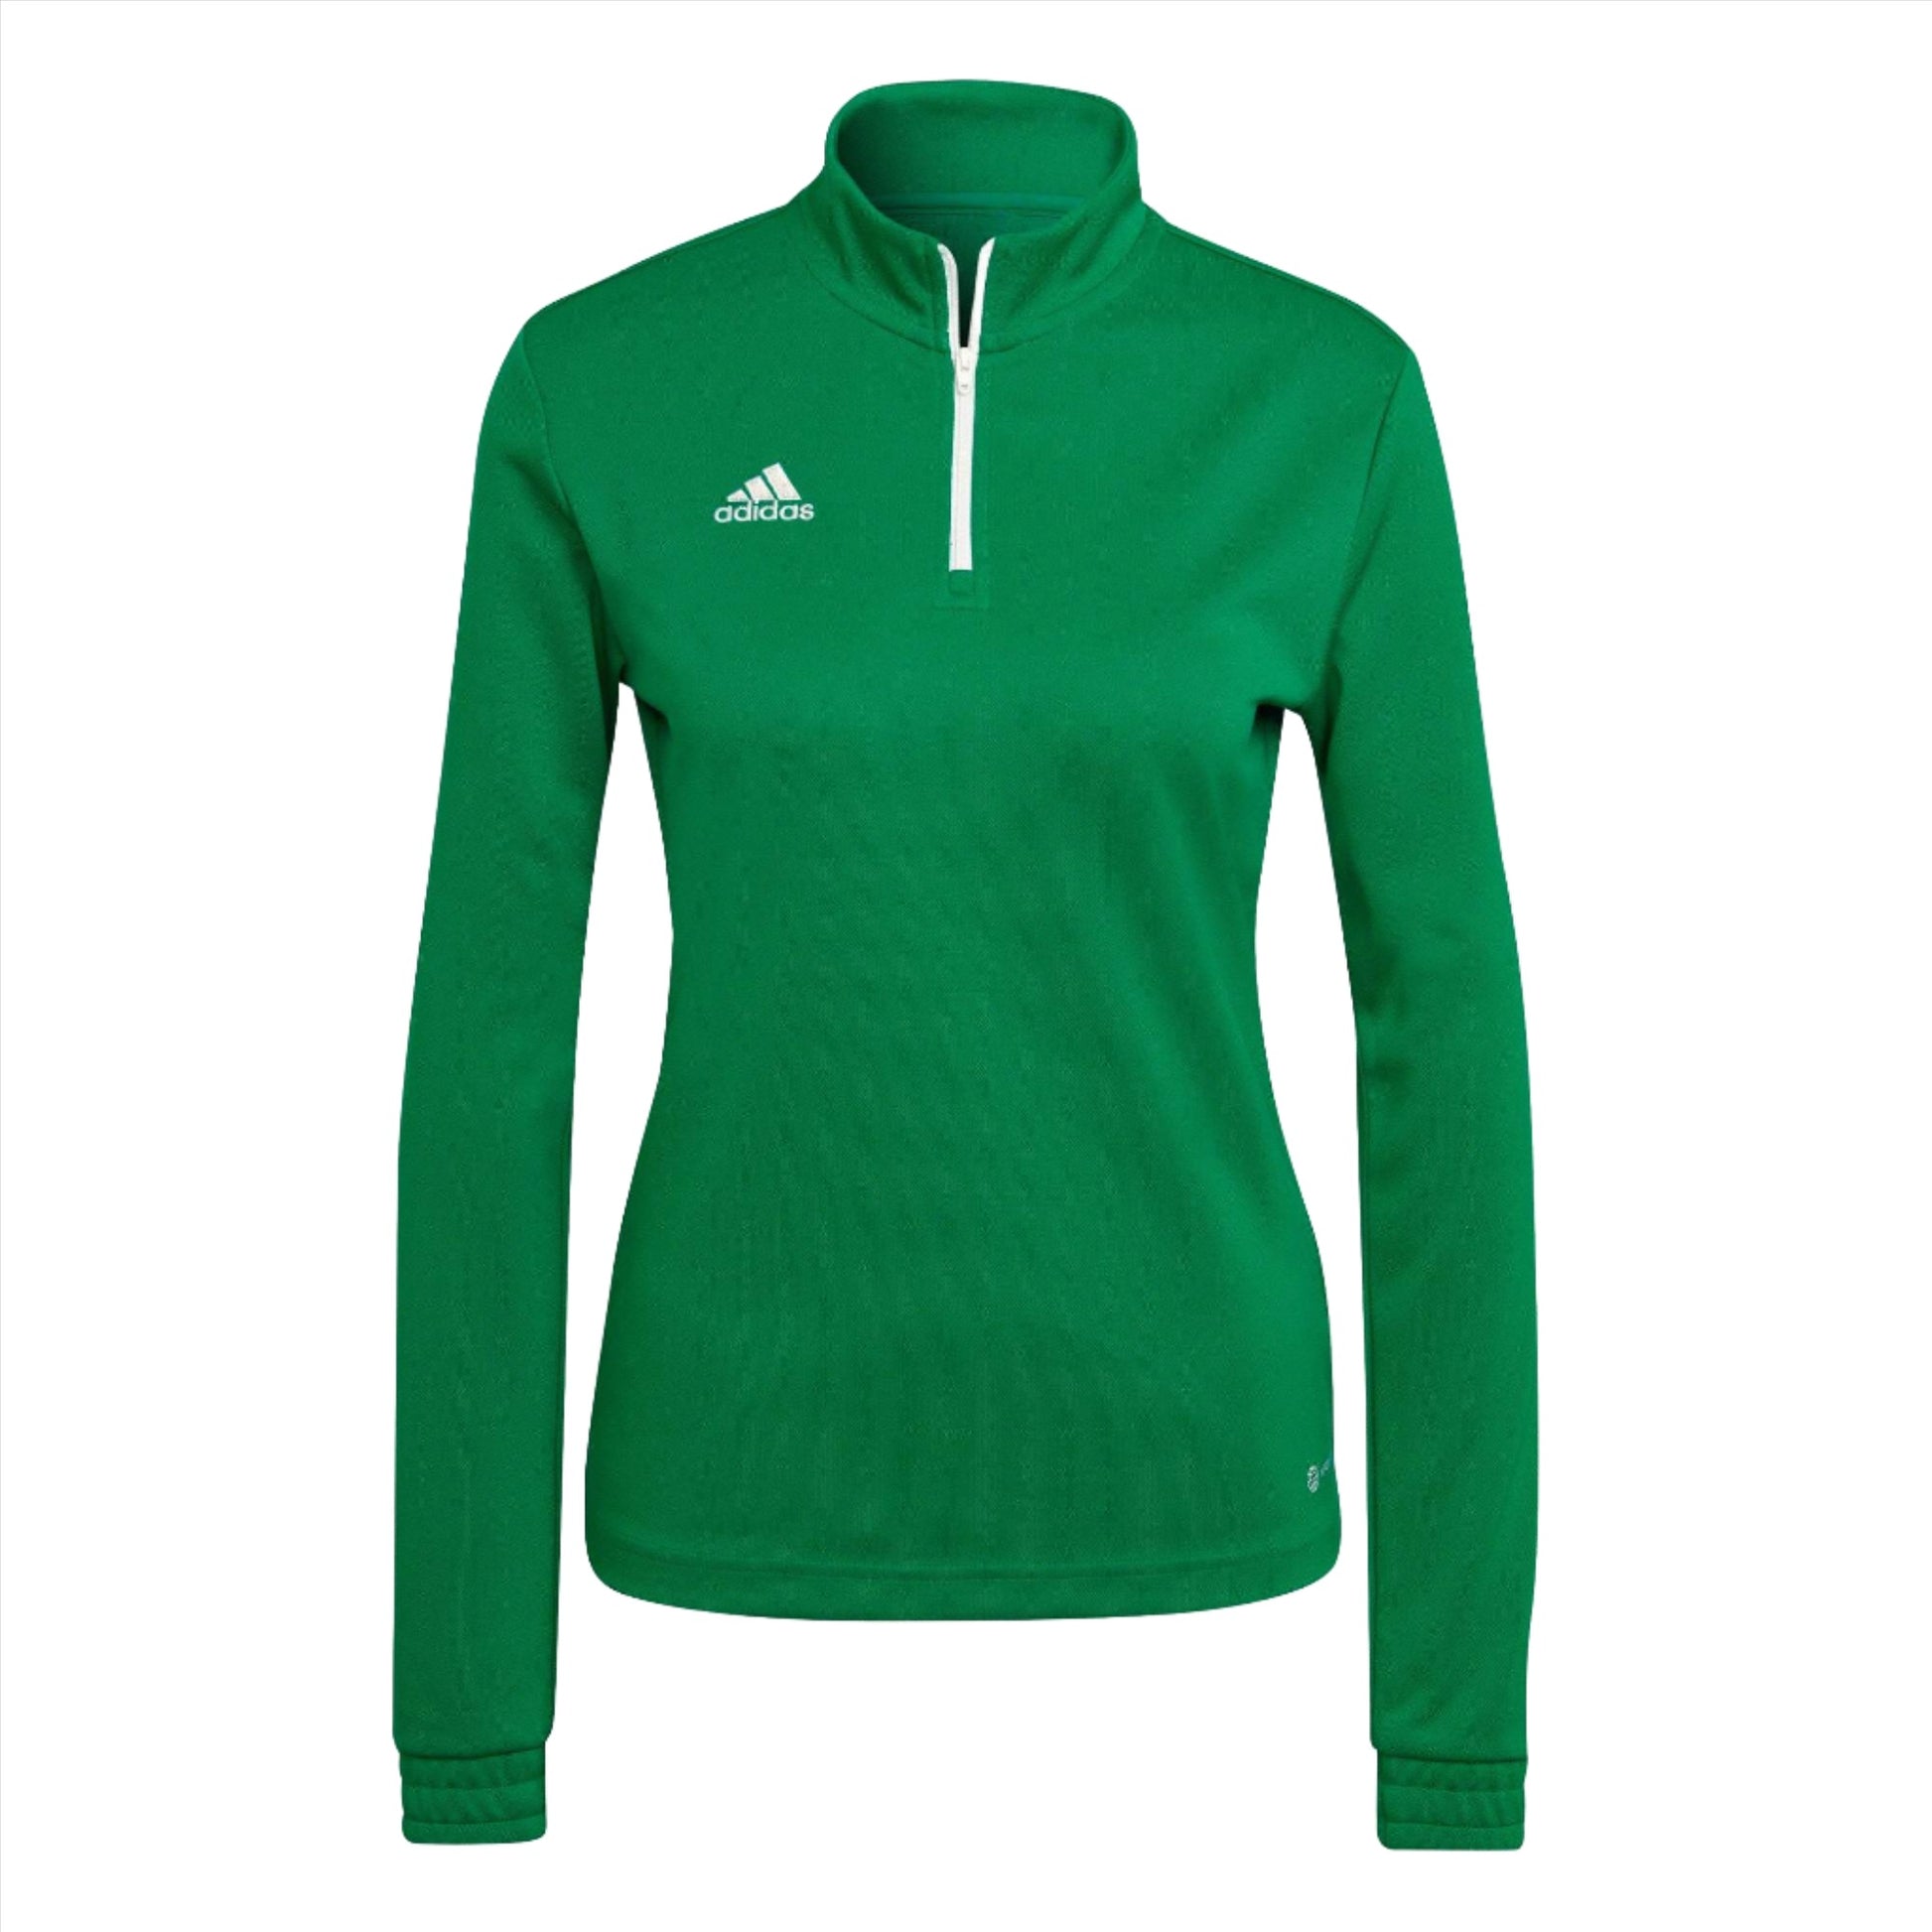 Entrada 22 Training Top Ladies by Adidas - The Luxury Promotional Gifts Company Limited